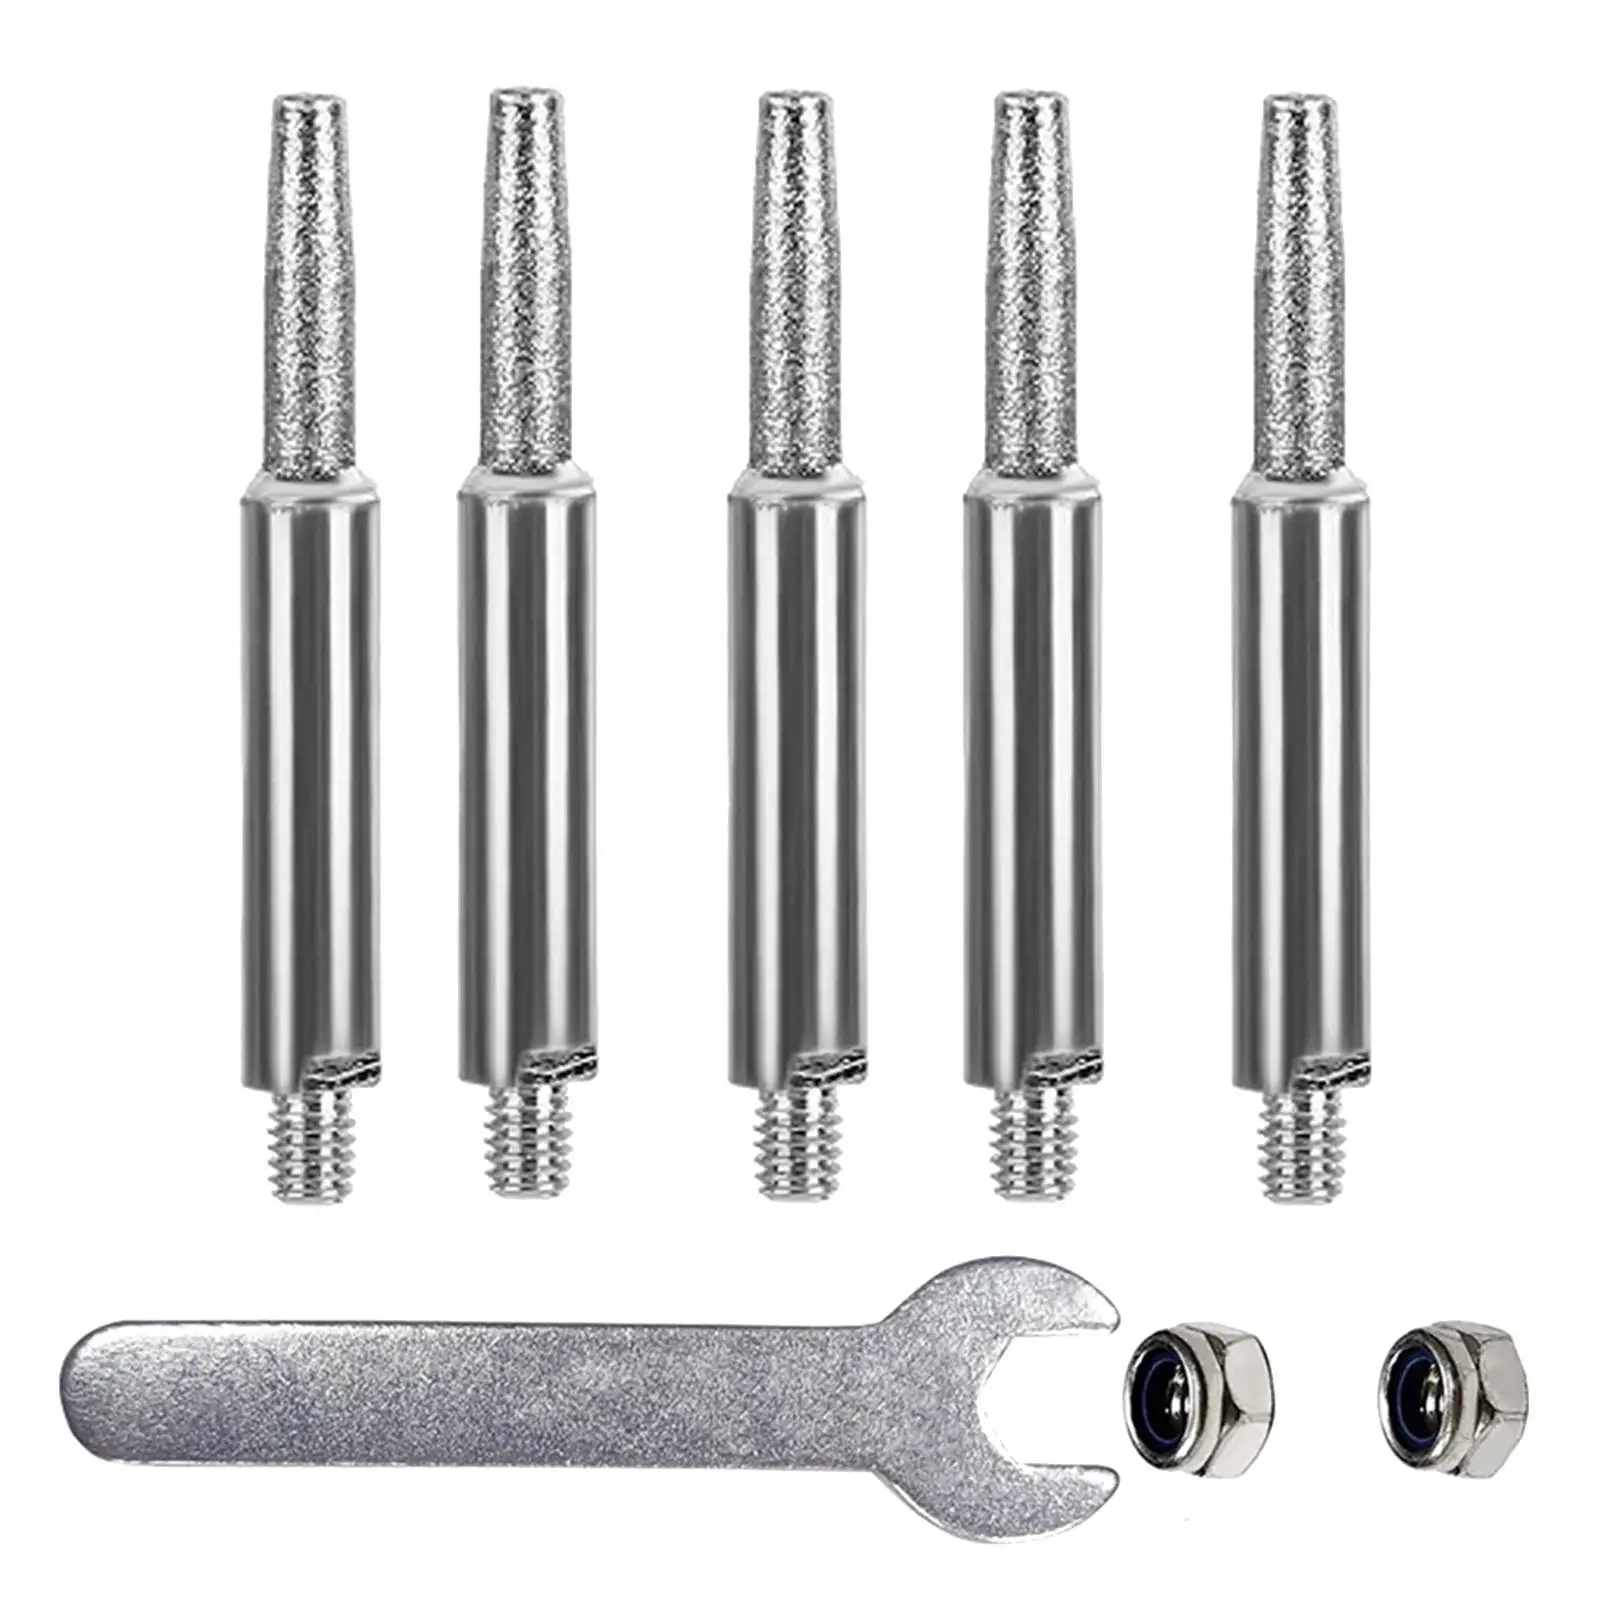 Burr Bit Set Replacement M5 Thread High Hardness Metal Grinding Tool Milling Polishing Cutter for Woodworking DIY